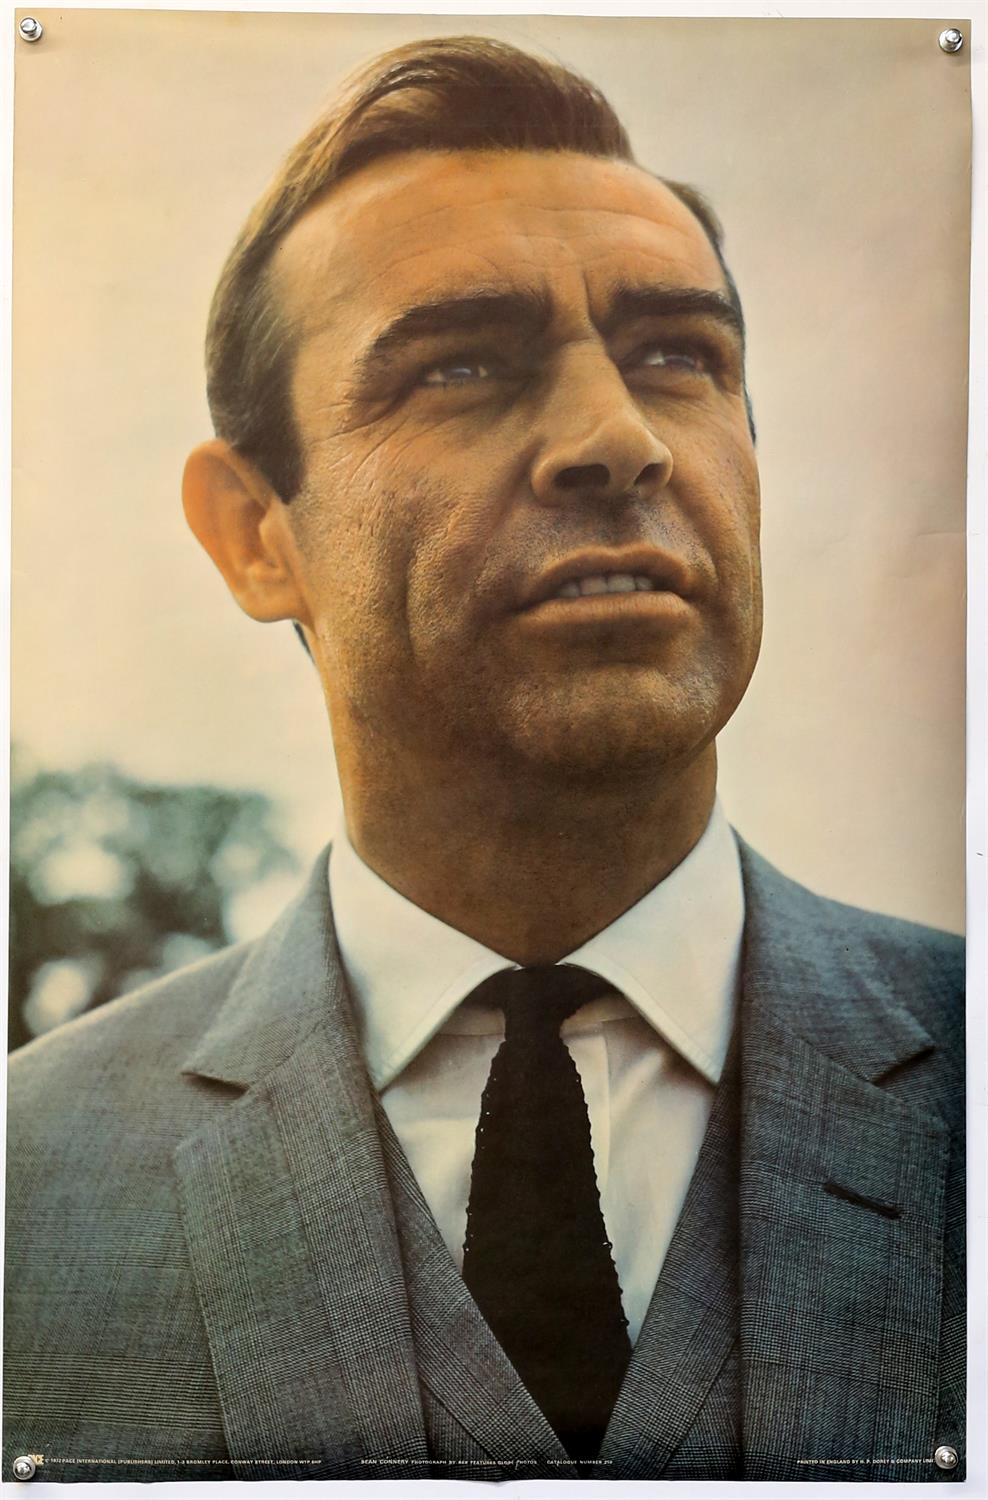 James Bond - 10 Commercial posters including images of Sean Connery by Pace Posters, - Image 2 of 3